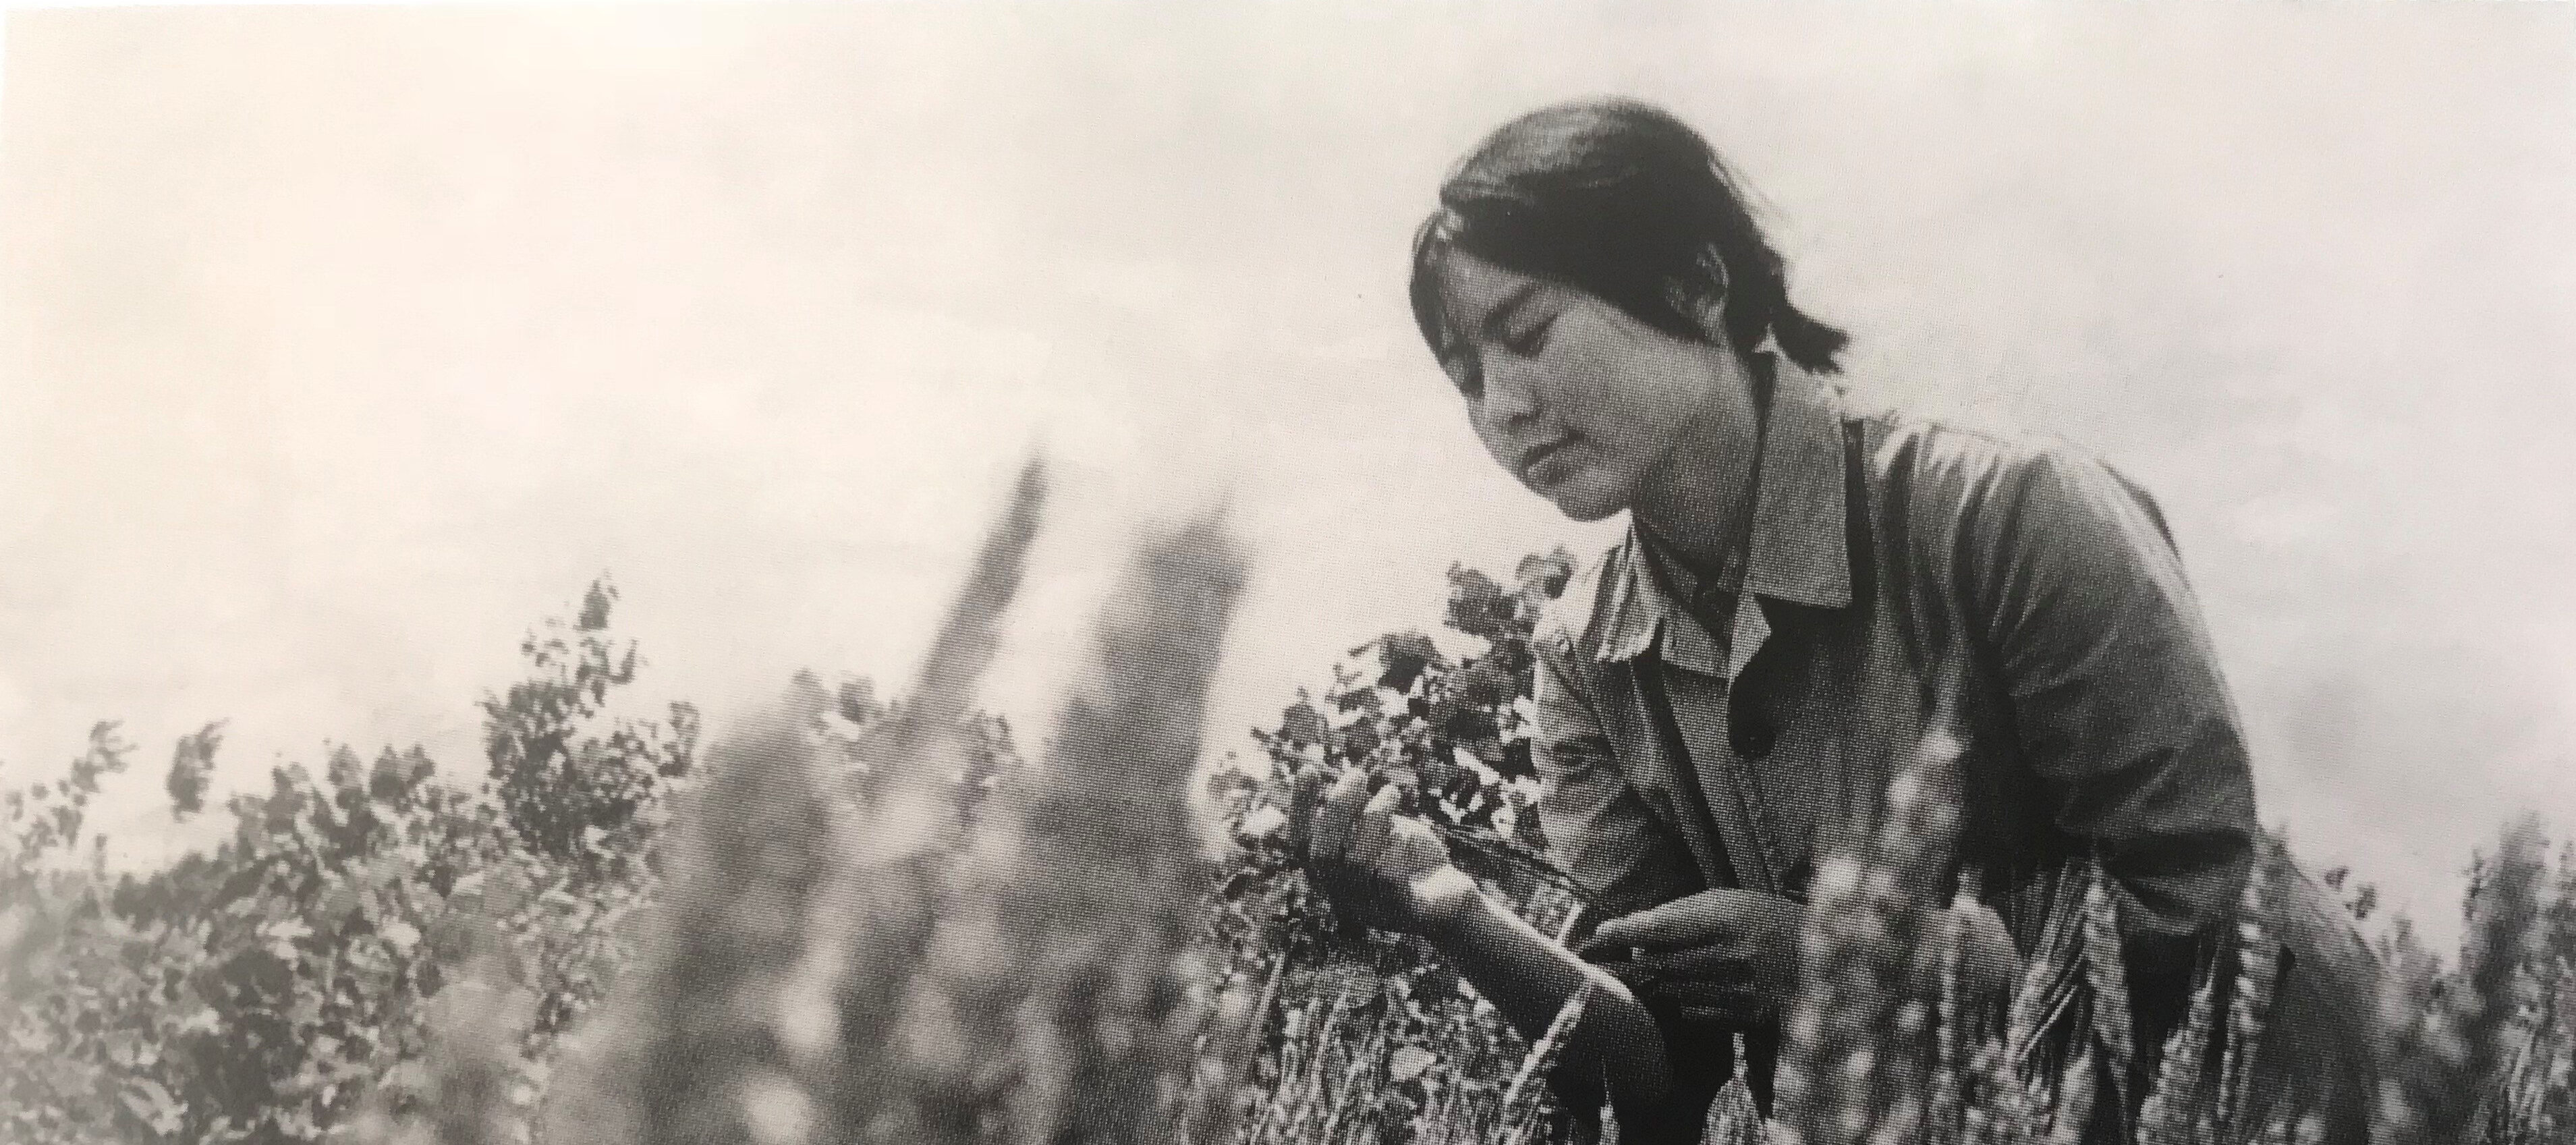 A black-and-white photograph of Hung Liu in her early twenties, wearing a collared shirt and short hair tied back. She sits in a wheat field and looks down at a stalk in her hands.